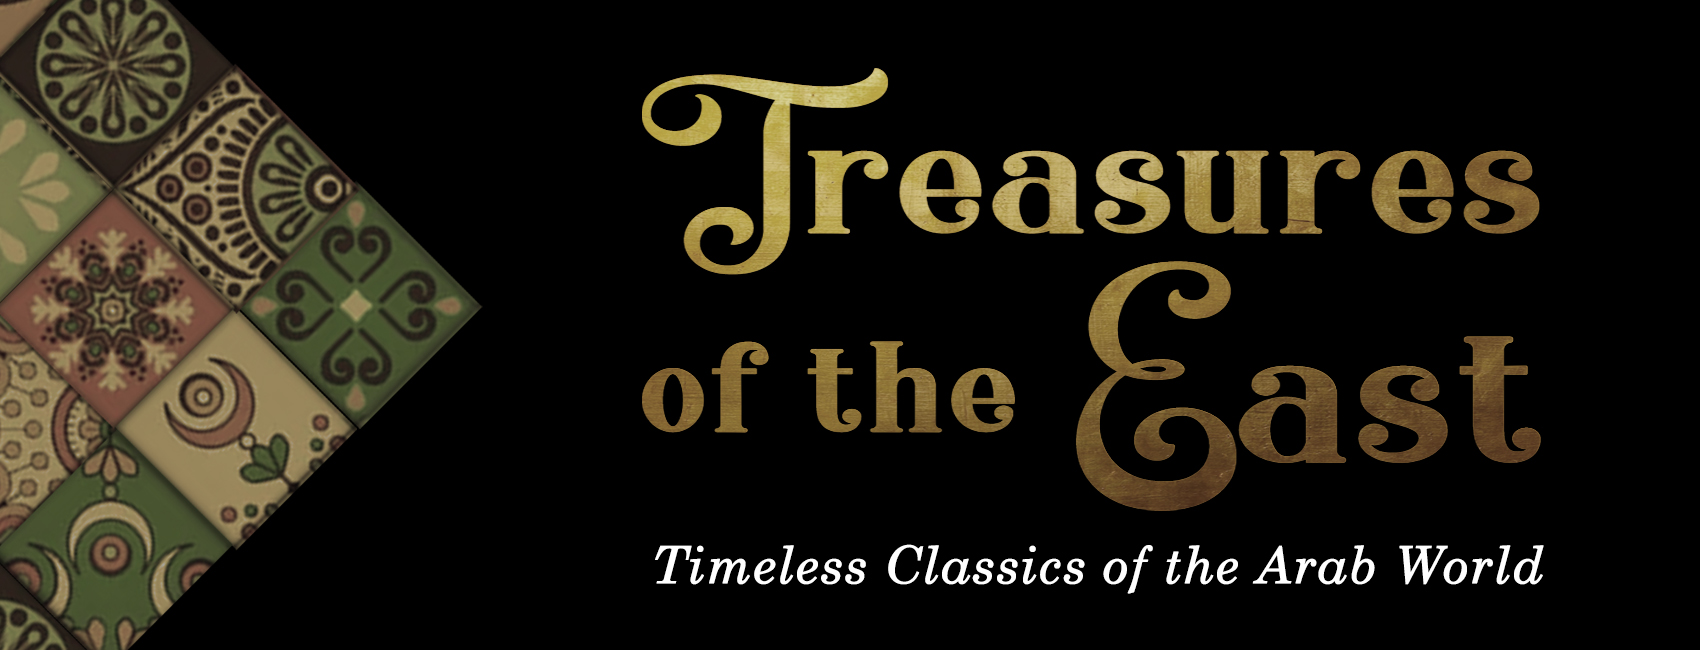 Treasures Of The East: Timeless Classics Of The Arab World at Sarofim Hall at The Hobby Center